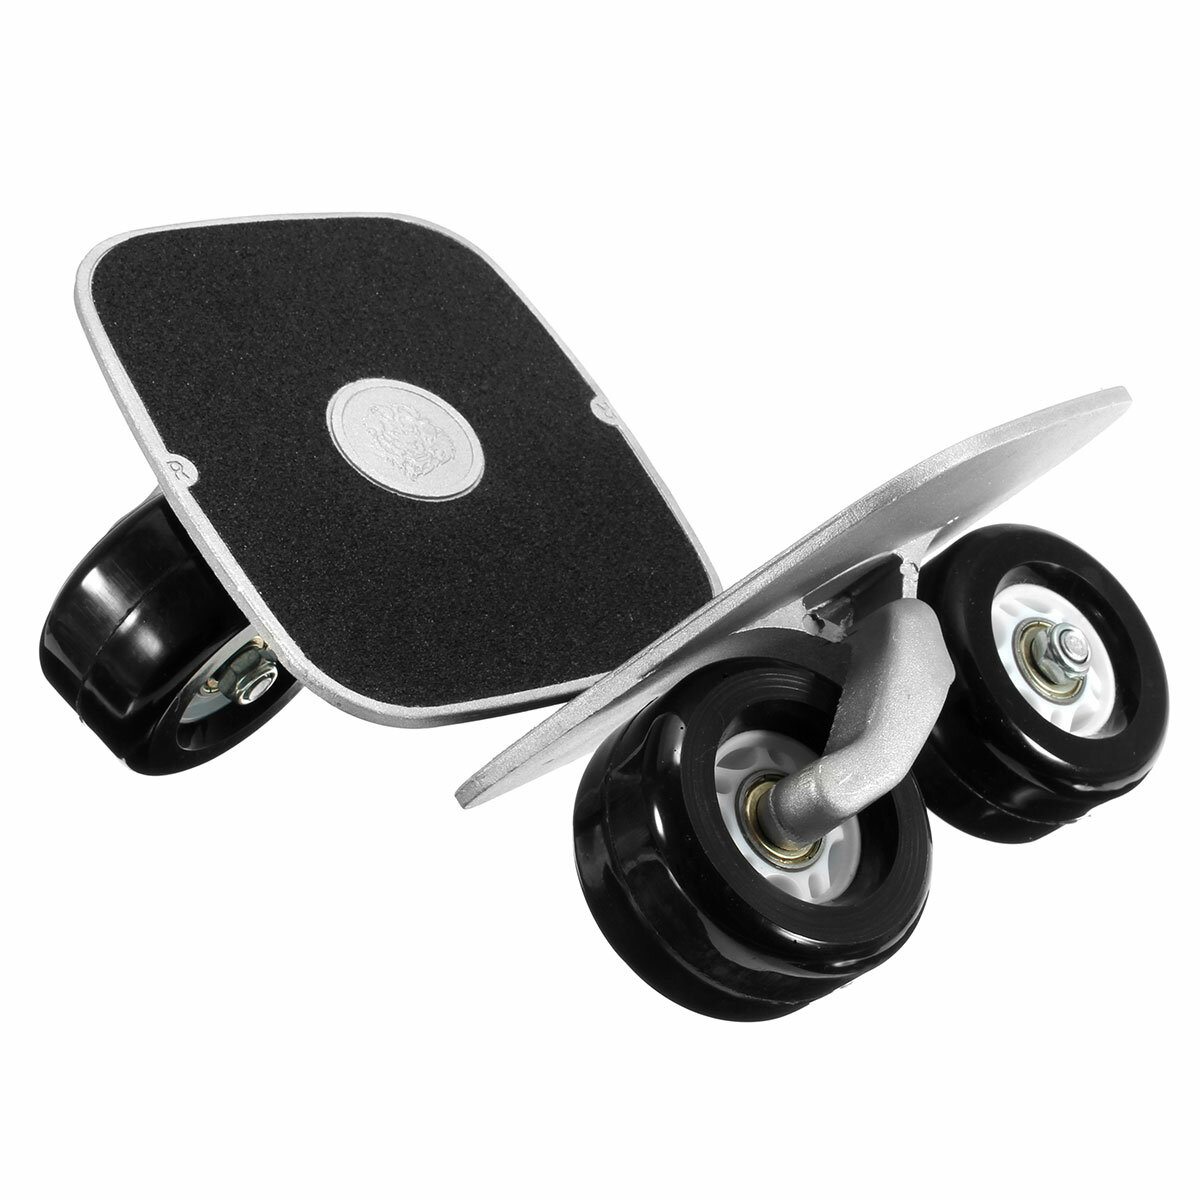 1 Pair Free Line Skates Aluminum Drifting Roller Skating Flashing Wheel With Wrench For Adults